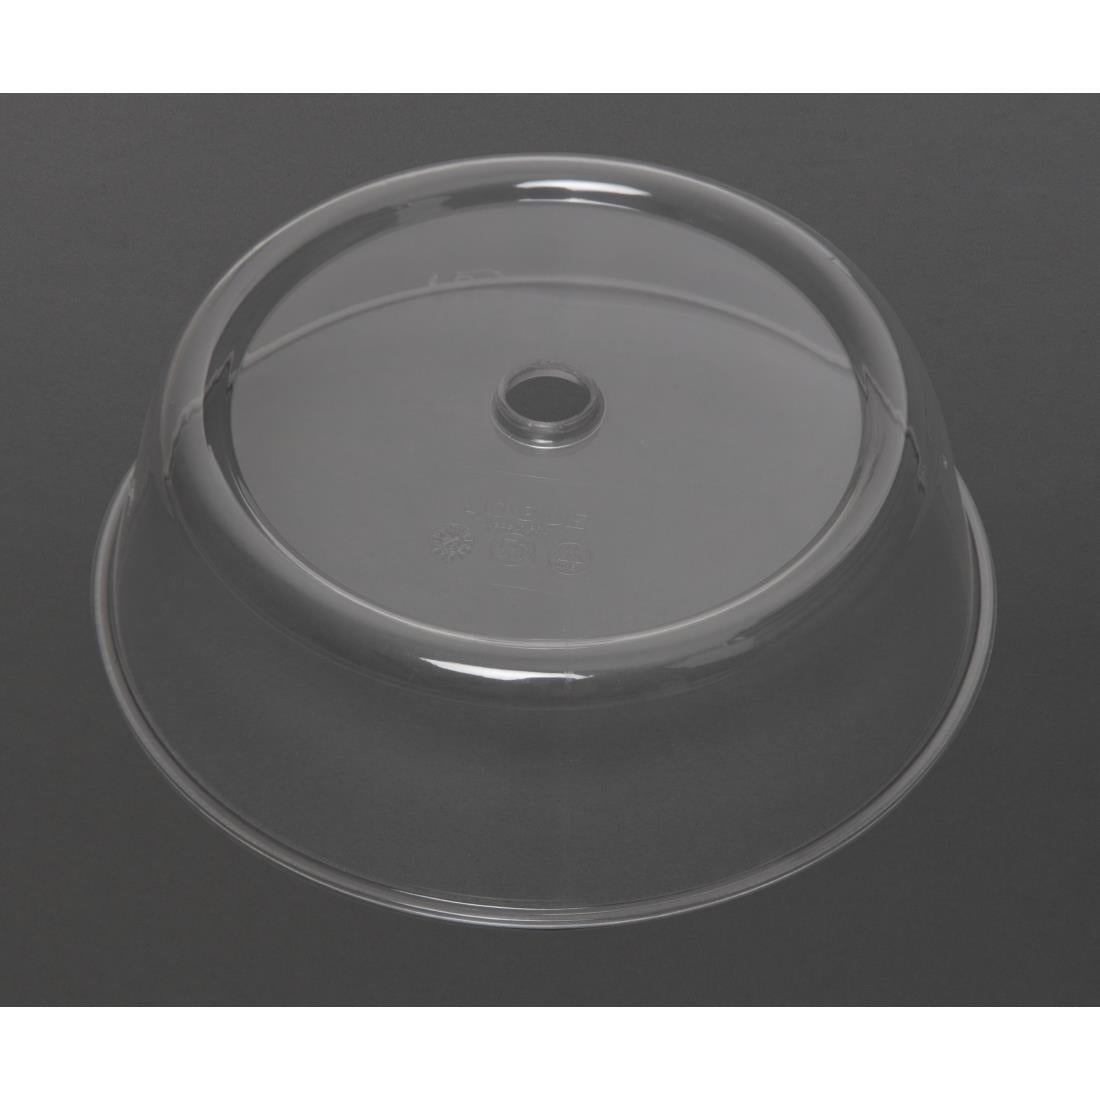 K483 Vogue Polycarbonate Plate Cover JD Catering Equipment Solutions Ltd